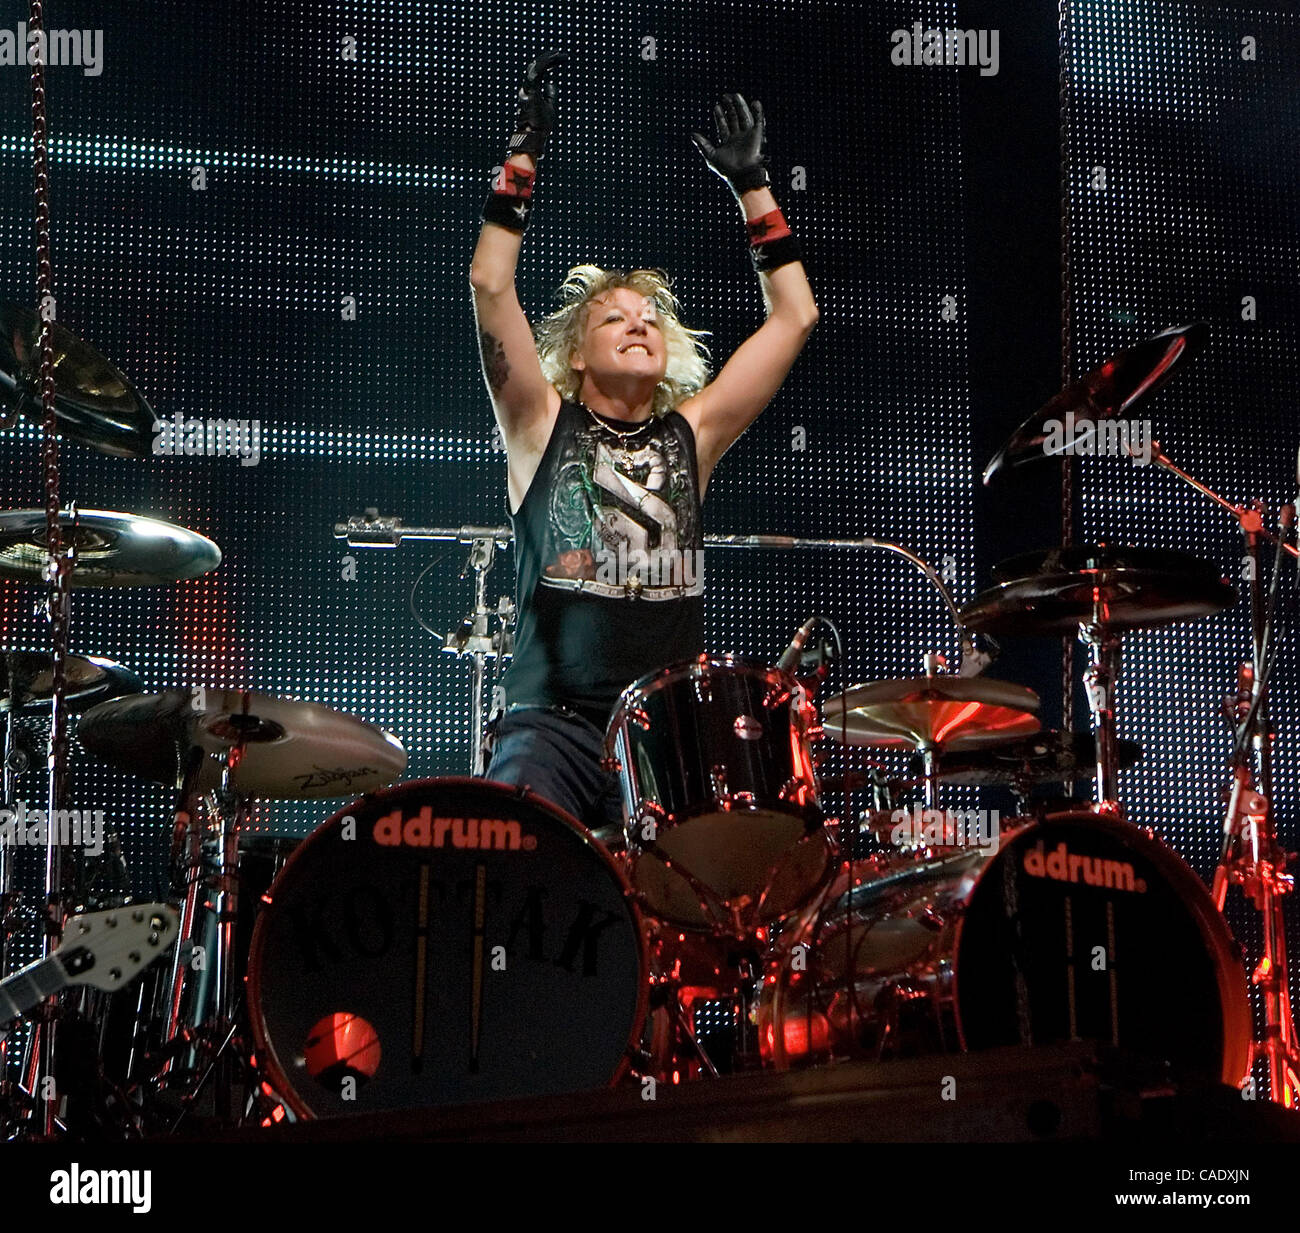 Aug 17, 2010 - Broomfield, Colorado, U.S. - Drummer JAMES KOTTAK of the Scorpions performs live at the 1st Bank Center in Broomfield, Colorado. (Credit Image: © Hector Acevedo/ZUMApress.com) Stock Photo